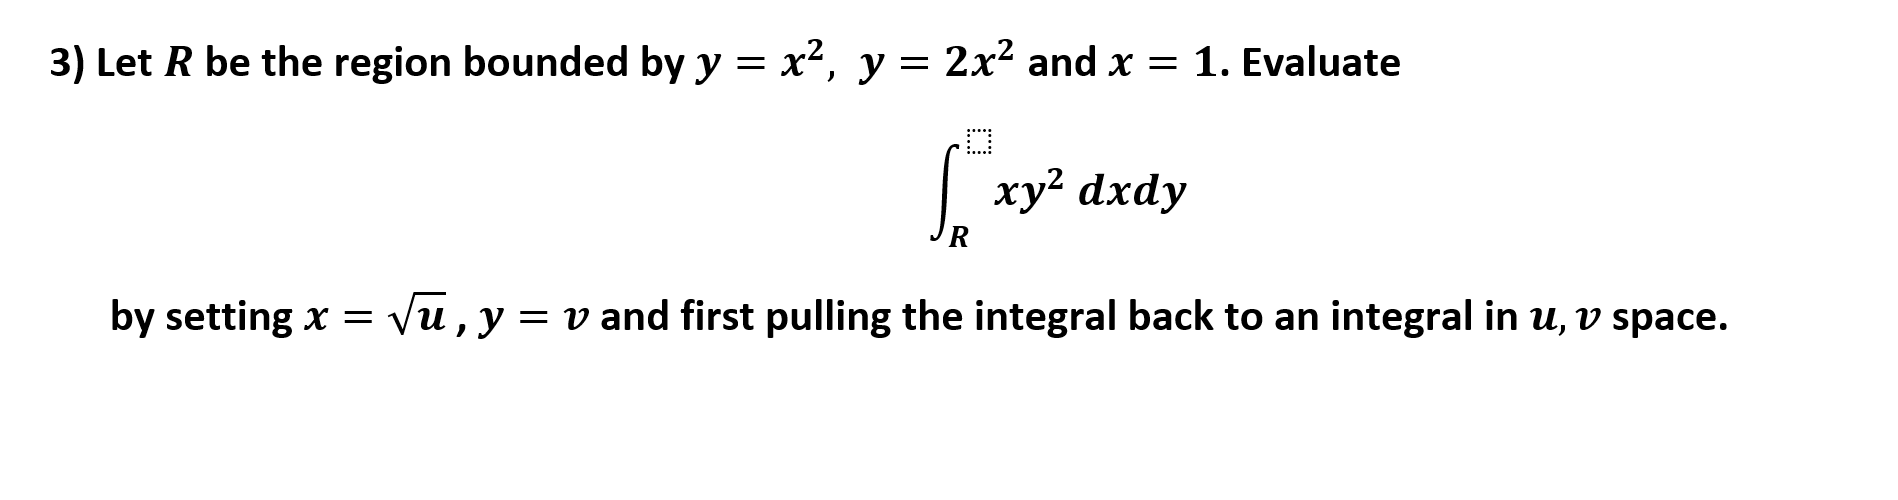 = x2, y = 2x2 and x = 1. Evaluate
3) Let R be the region bounded by y
xy2 dxdy
Vu, y
v and first pulling the integral back to an integral in u, v space
by setting x
